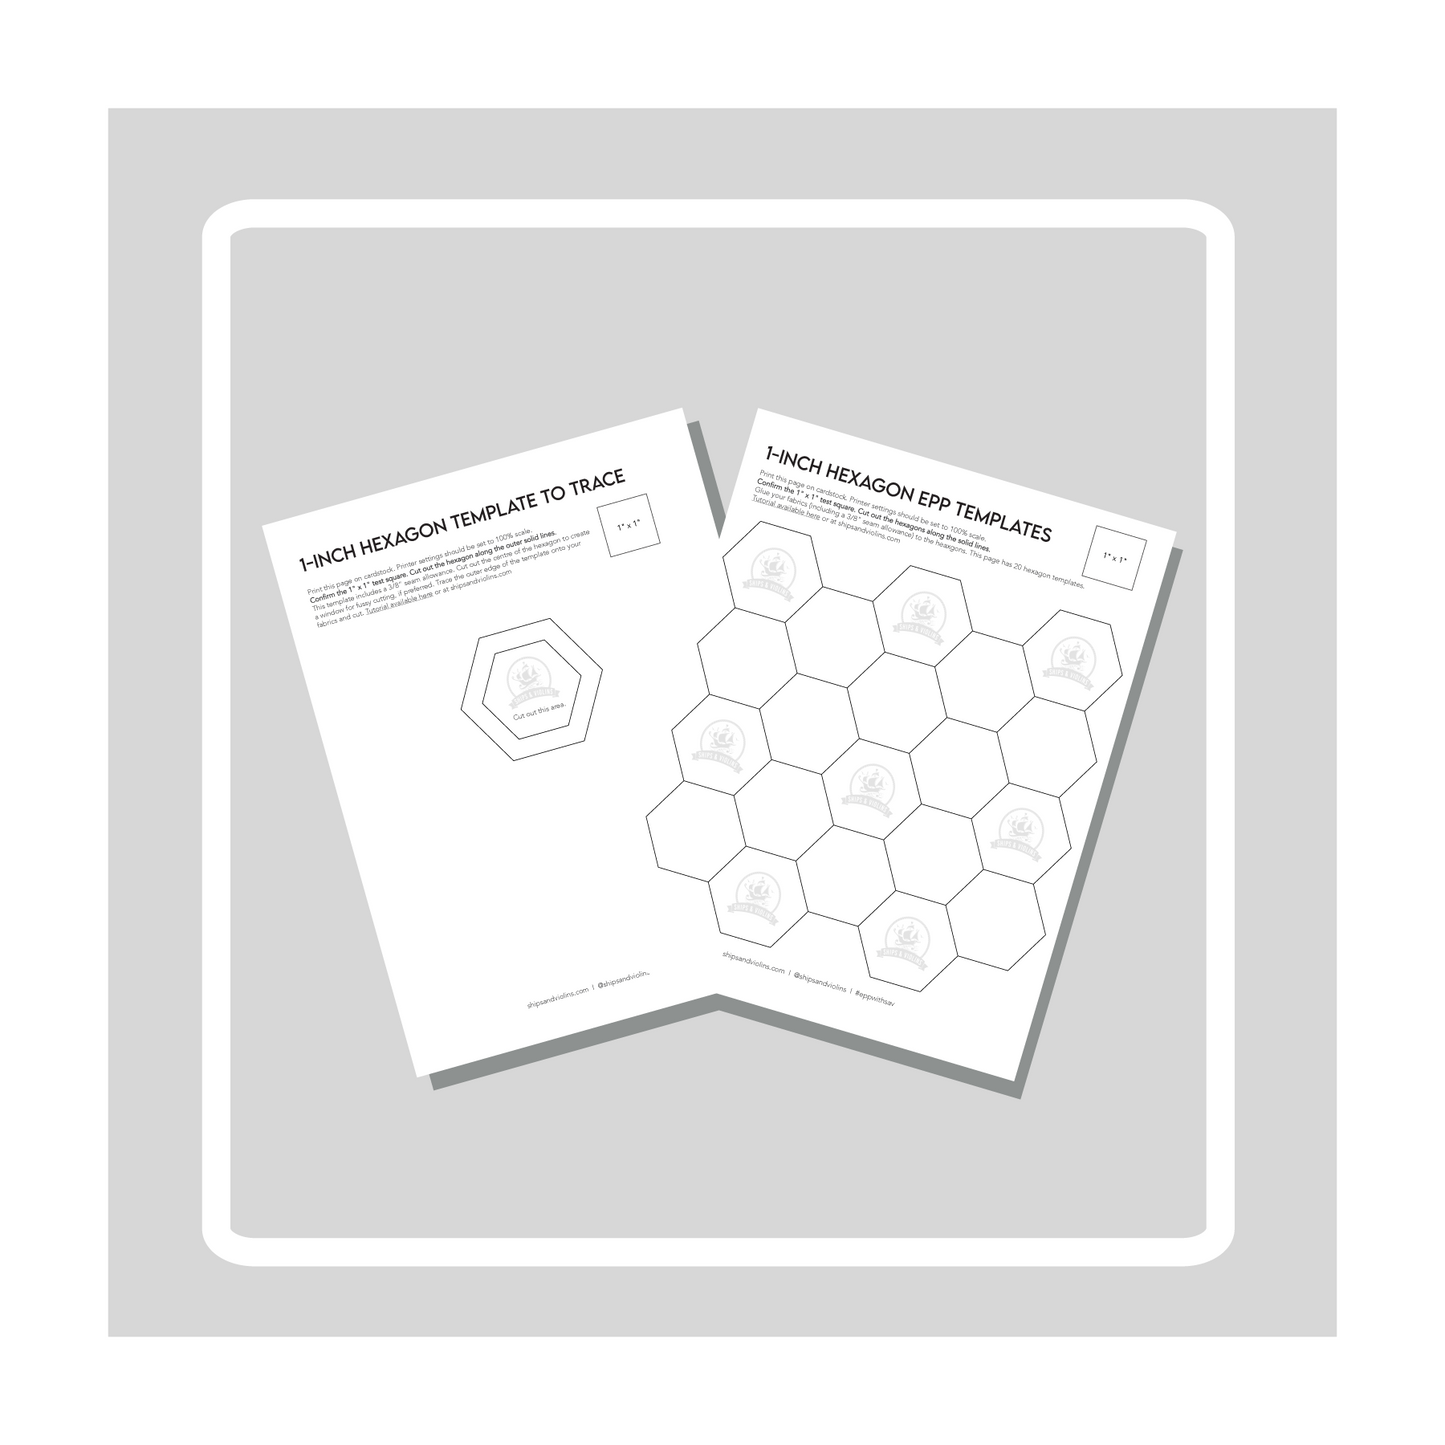 1-Inch Hexagon Templates for English Paper Piecing